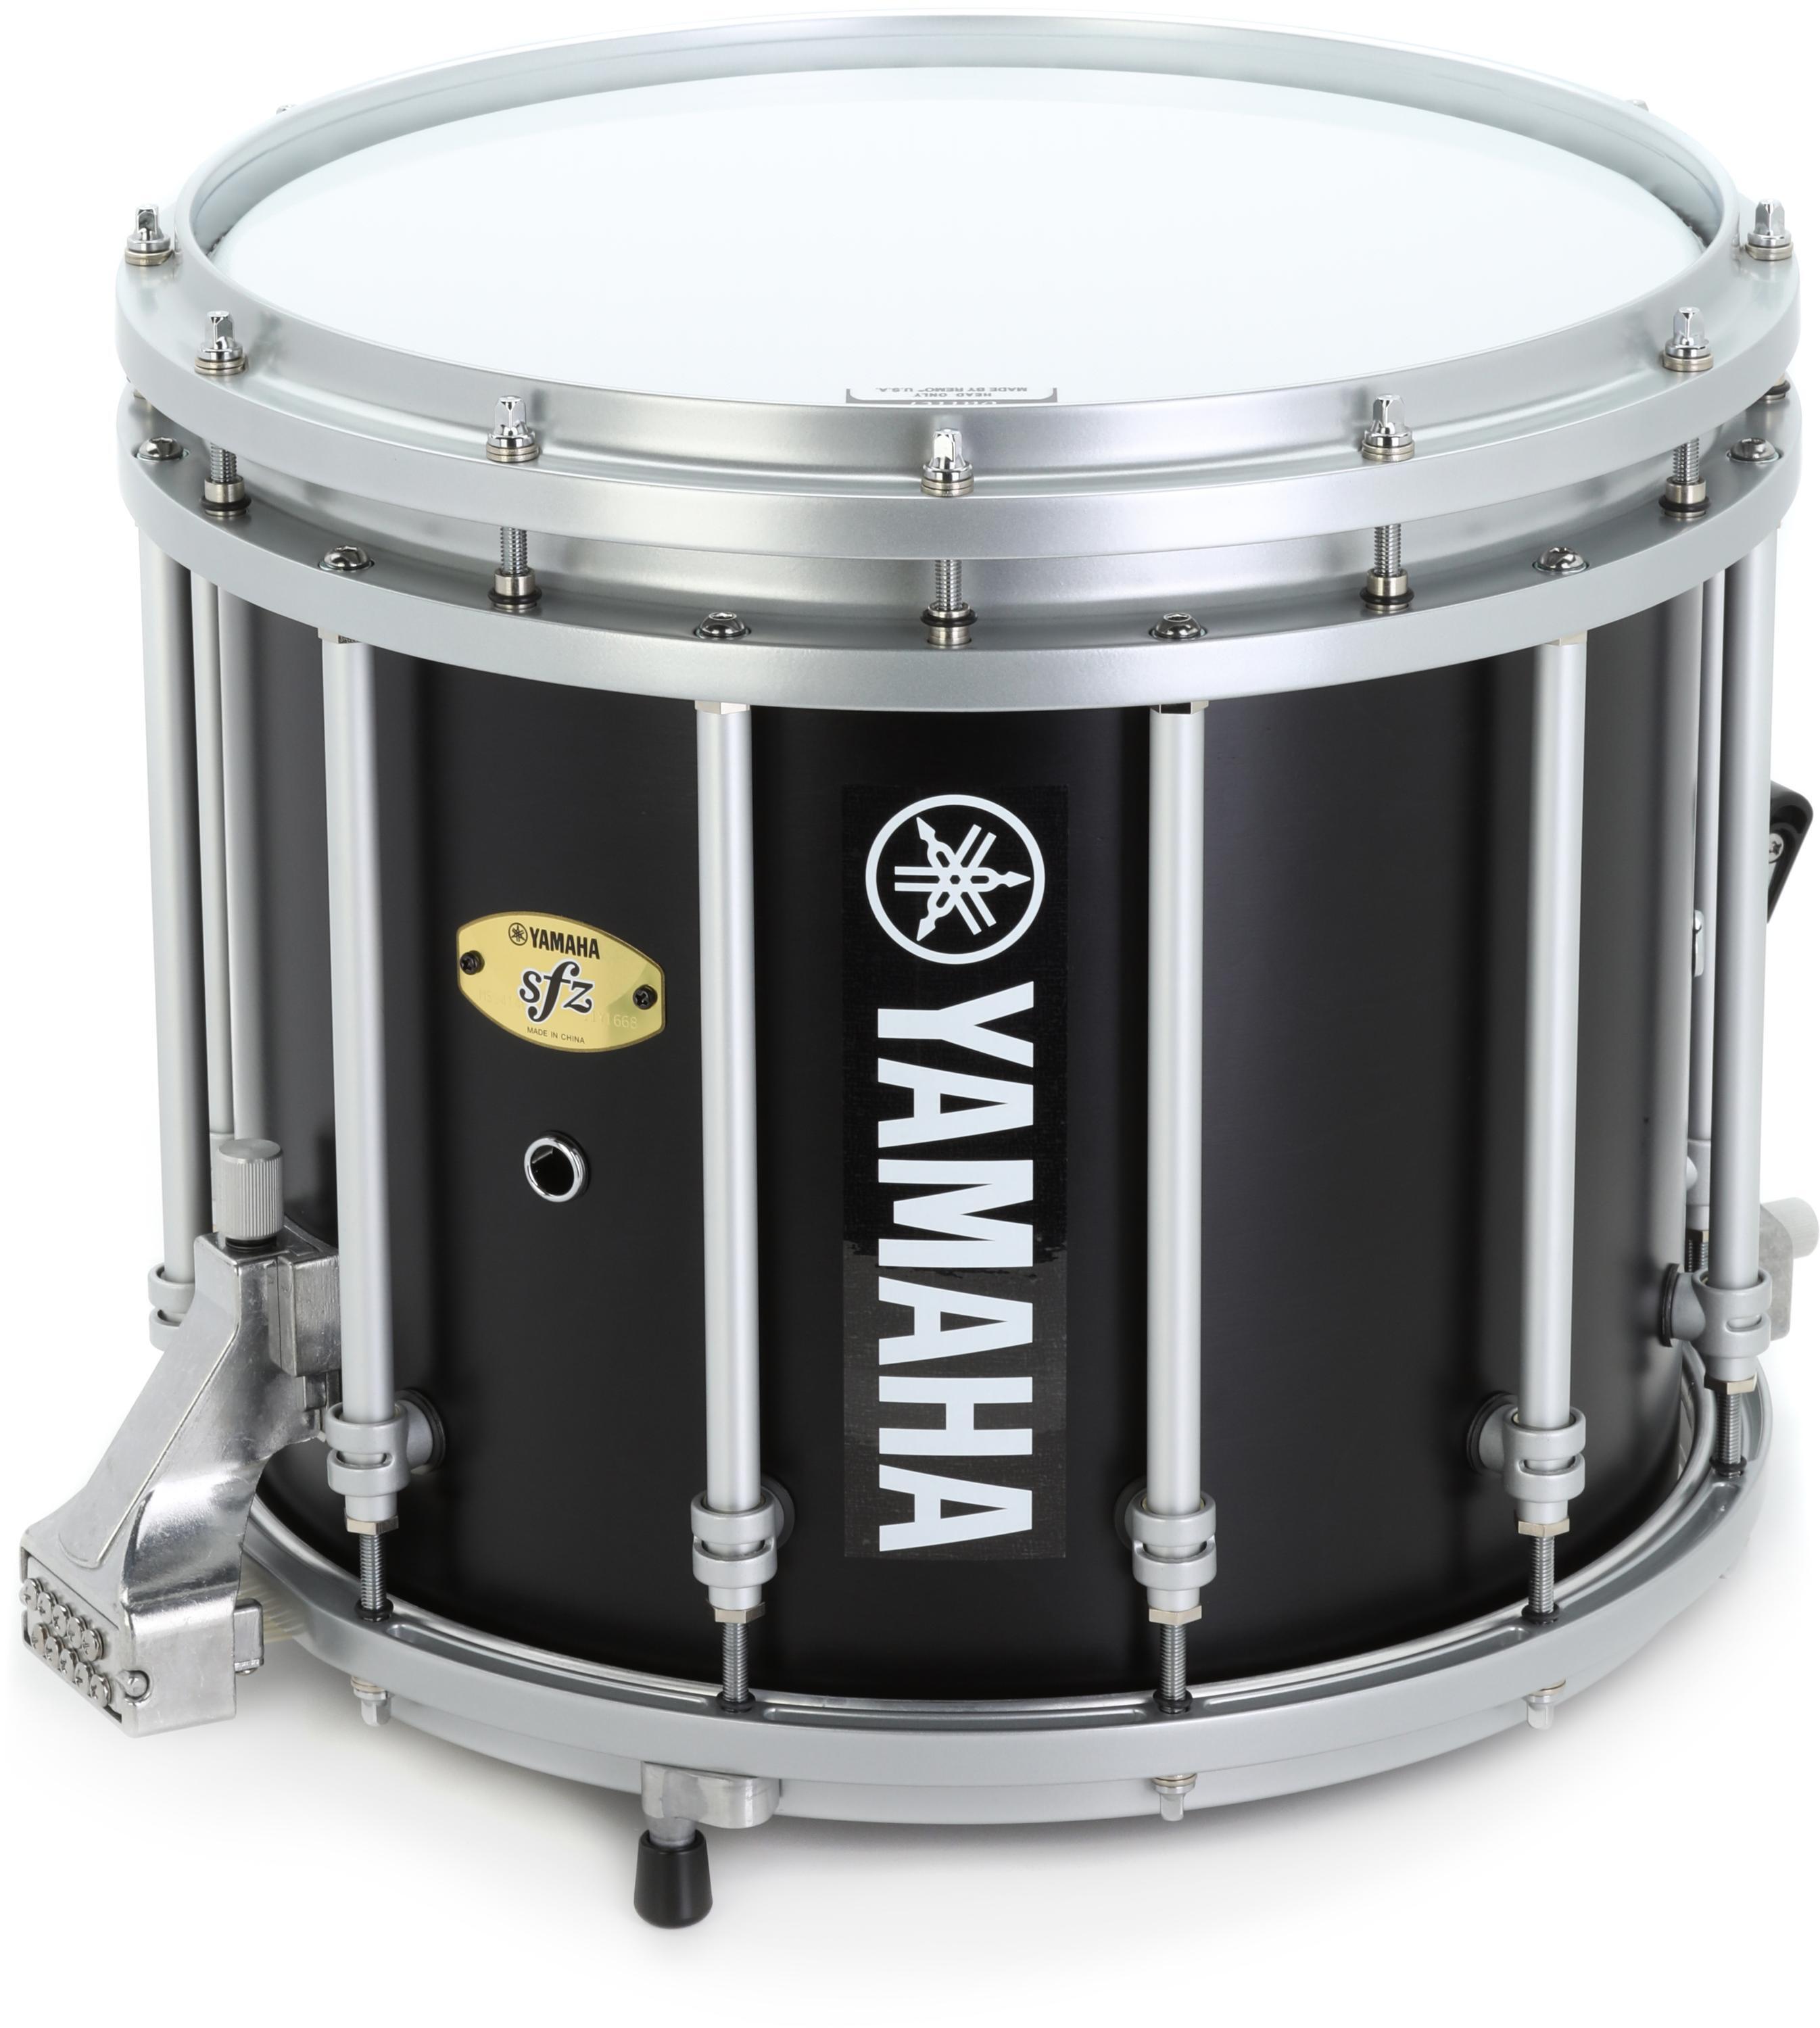 Yamaha MS-9414 14-inch x 12-inch SFZ Marching Snare Drum with Anodized  Hardware - Black Forest